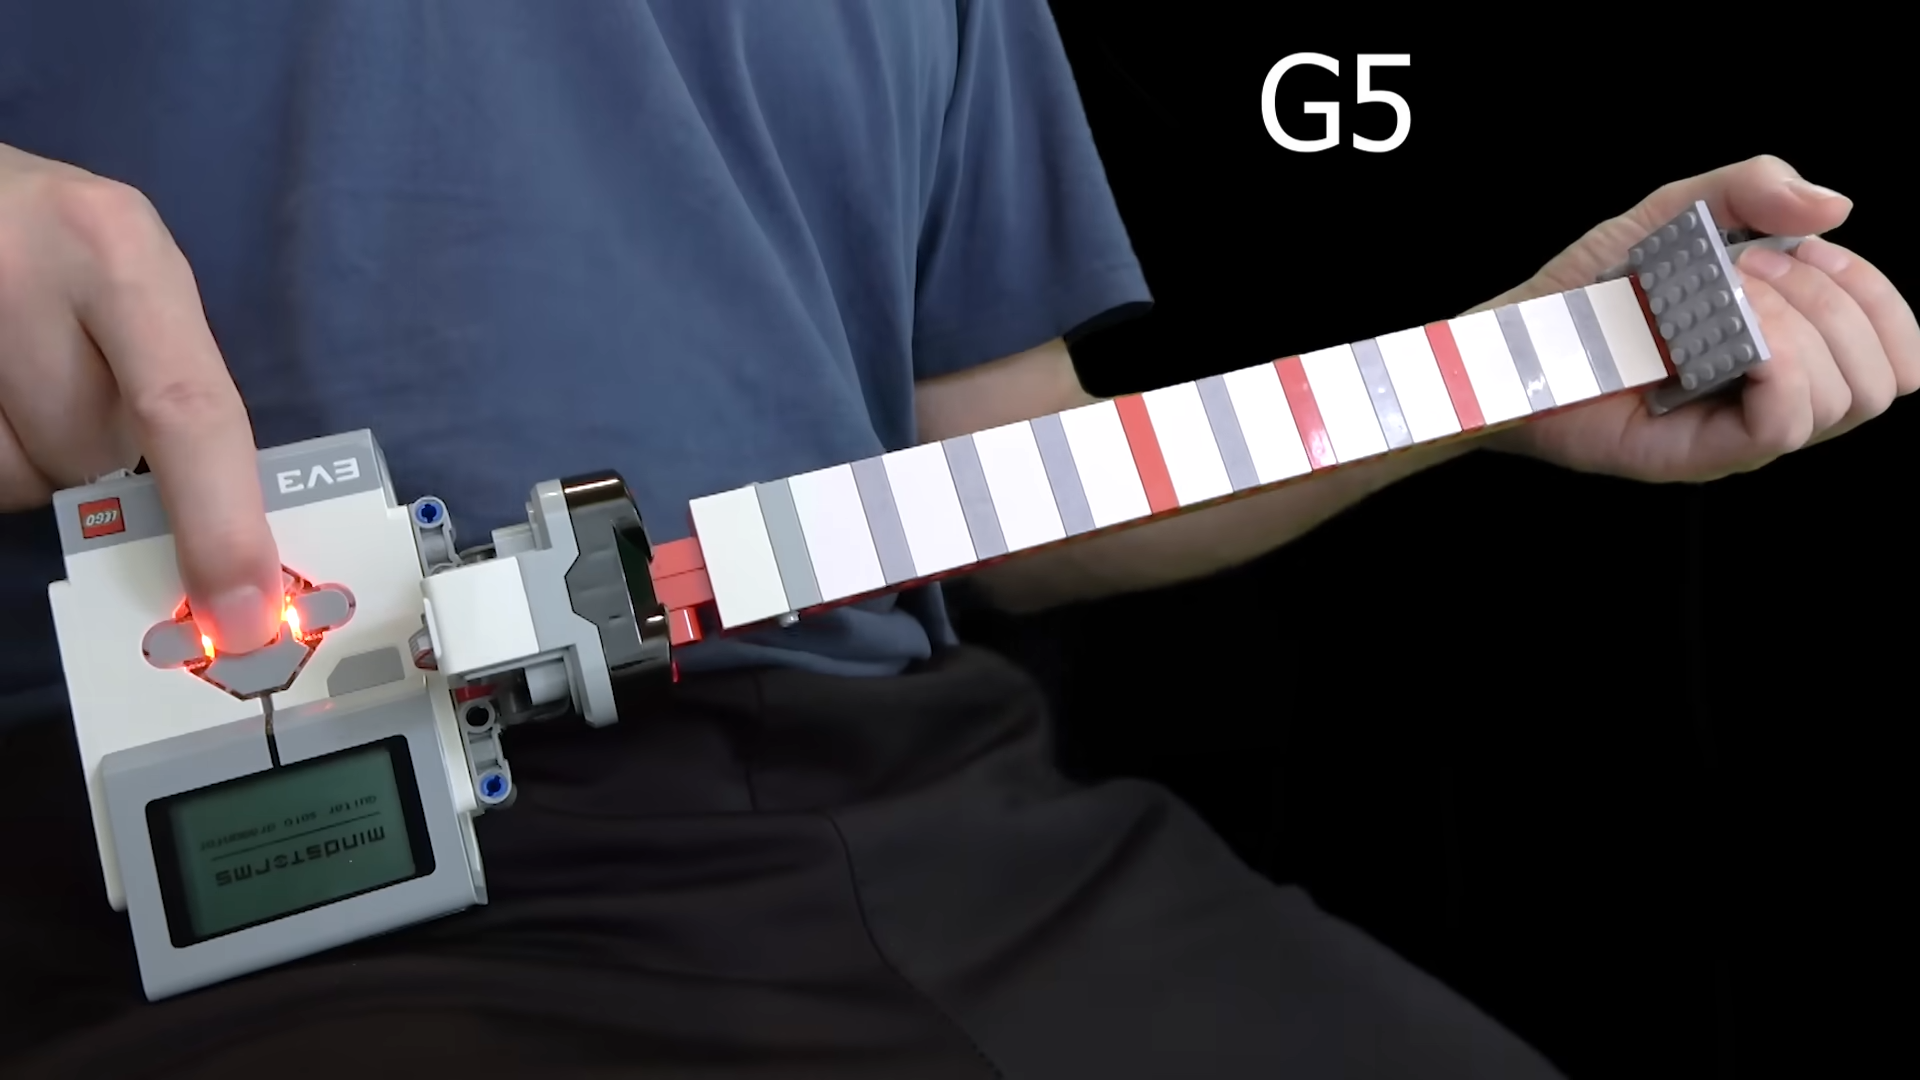 Lego Guitar Is Really an Ultrasonically-Controlled Synth